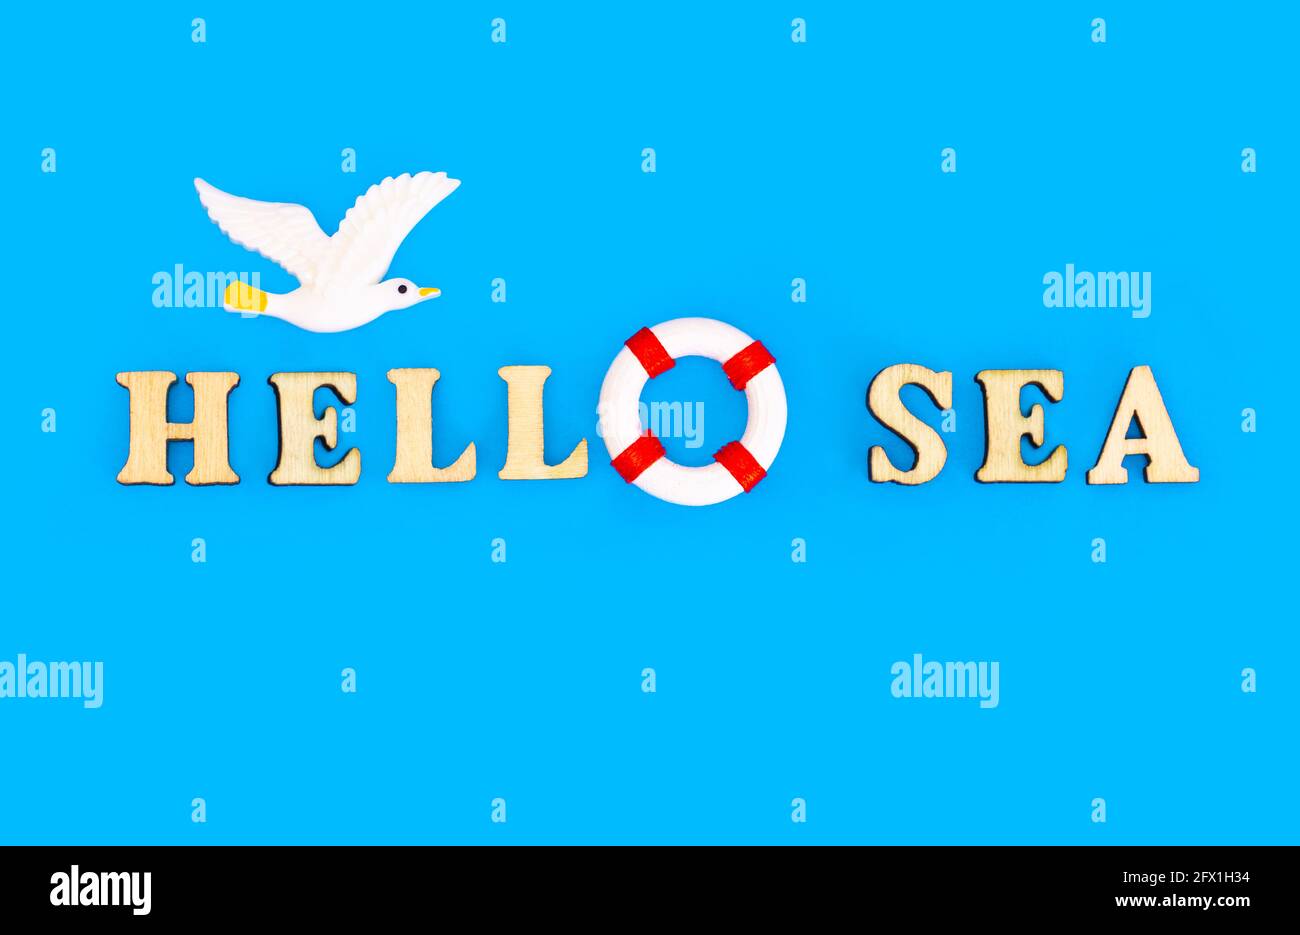 HELLO SEA composition made of wooden letters arranged on blue background with a flying toy seagull above Stock Photo